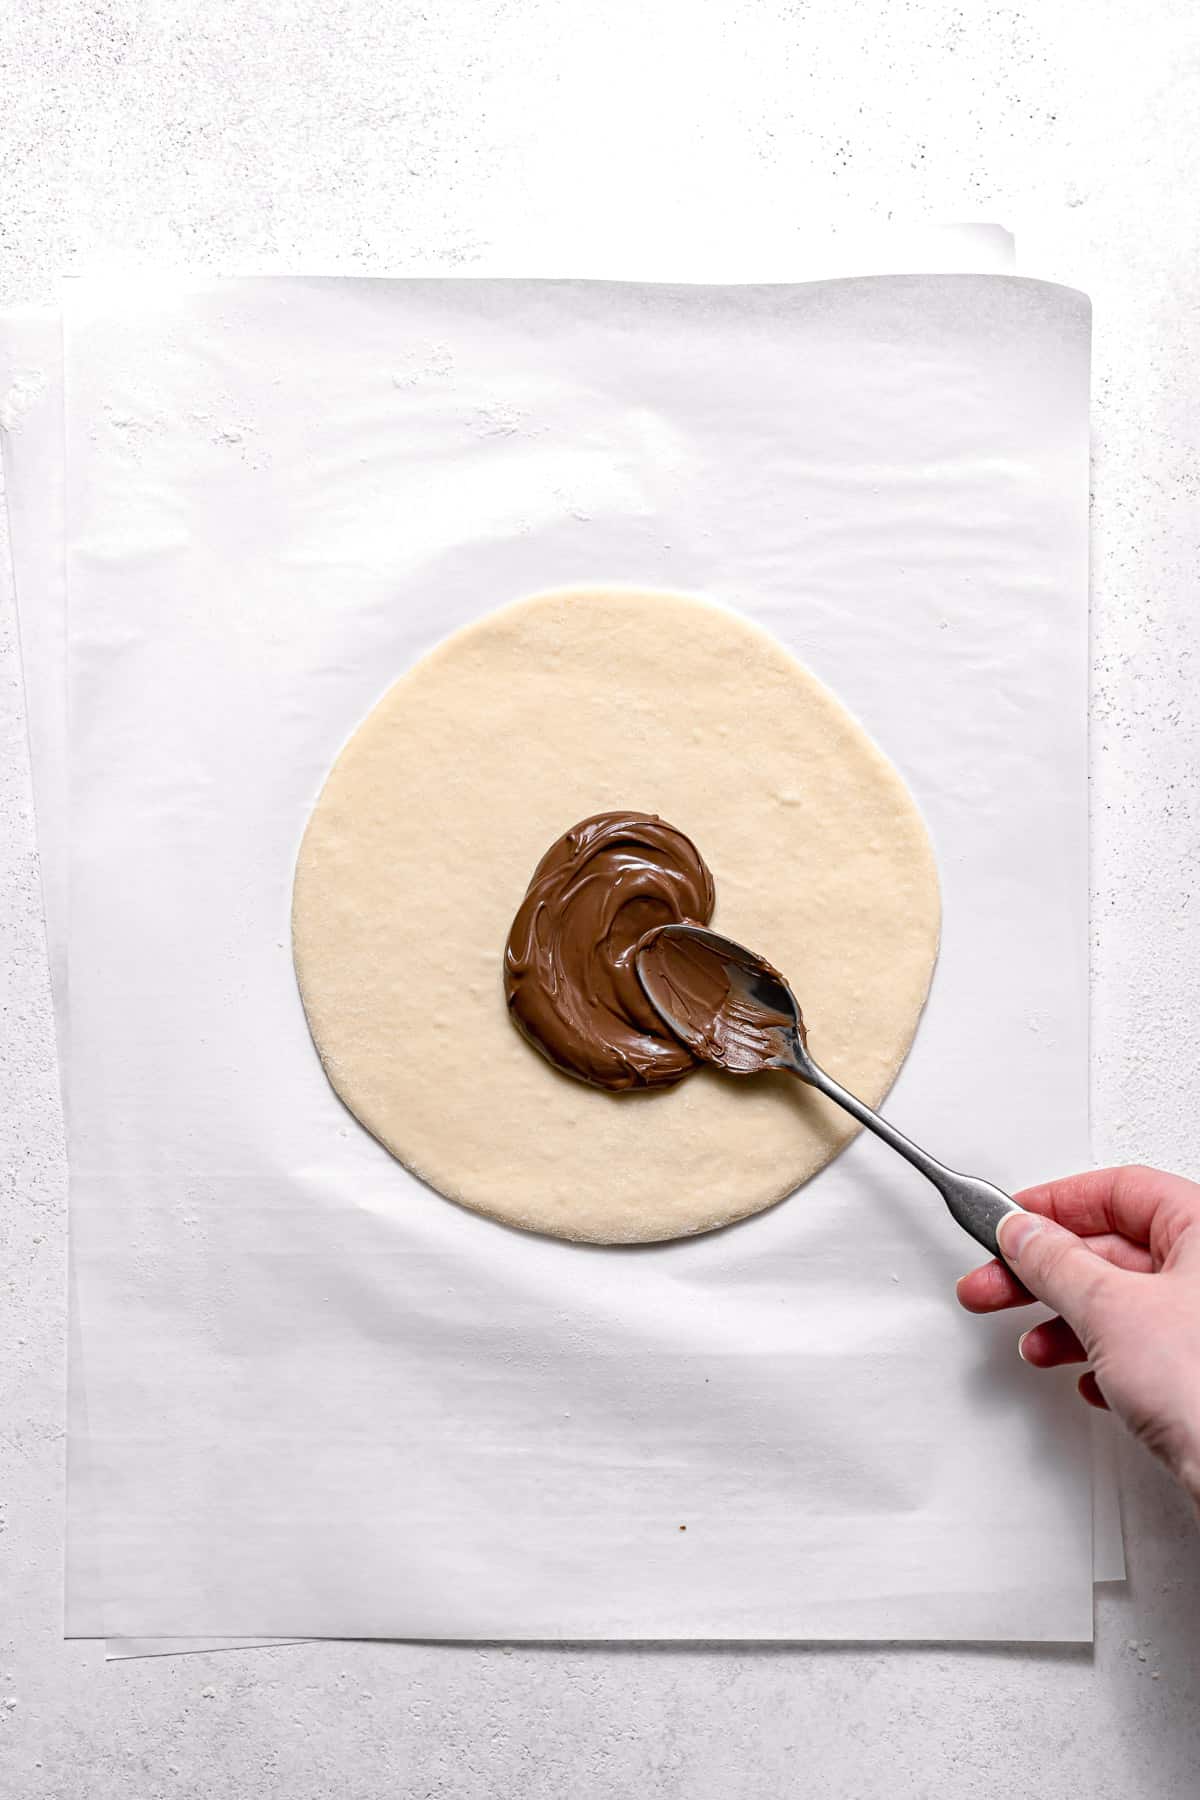 nutella being spread onto first dough layer.